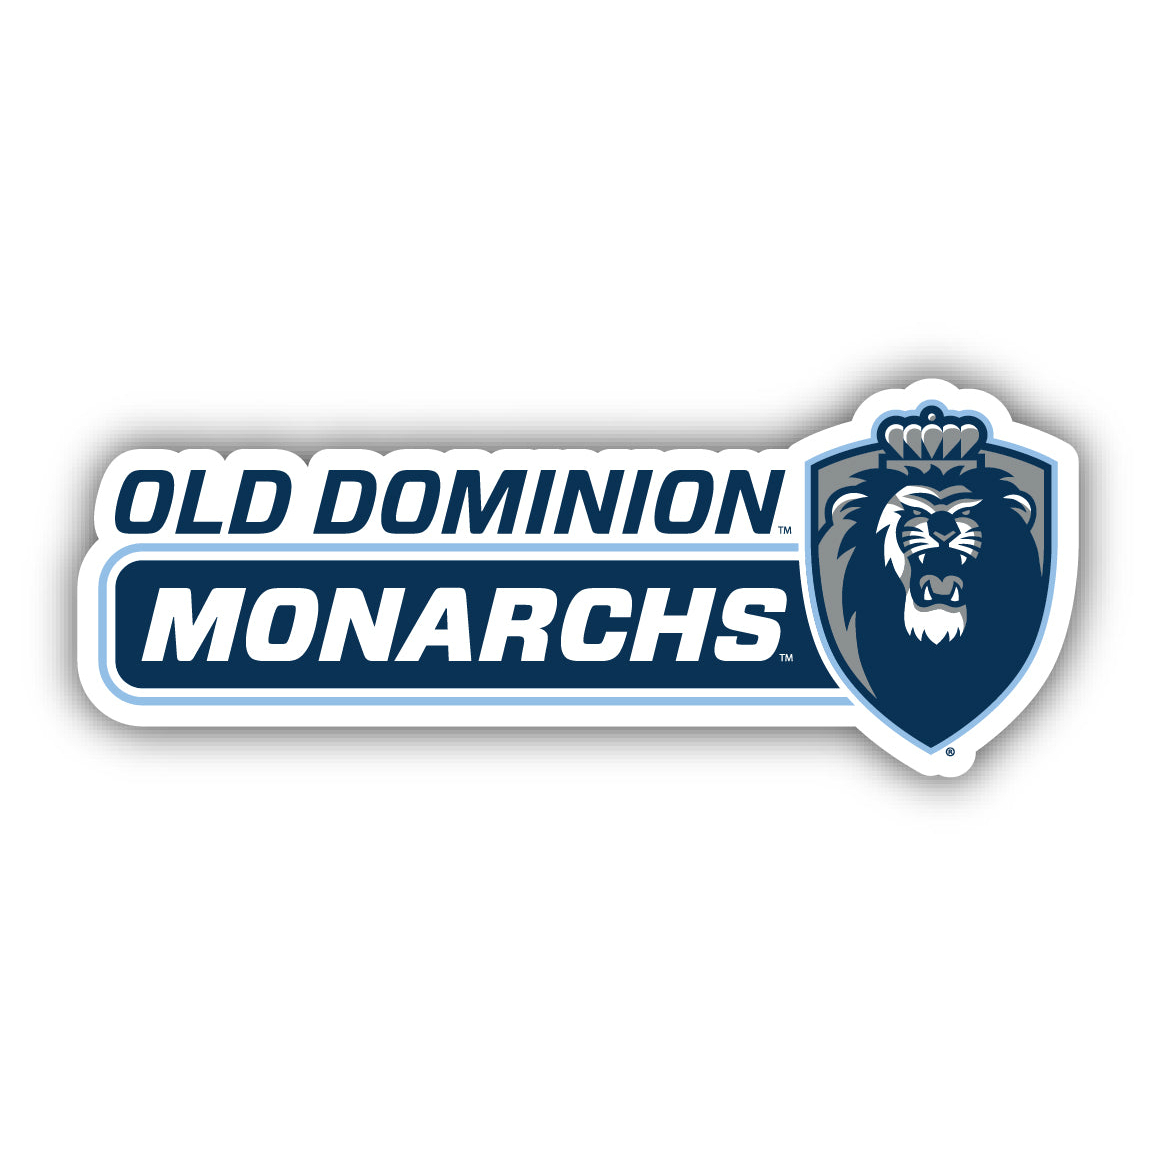 Old Dominion Monarchs 4 Inch Wide Colorful Vinyl Decal Sticker